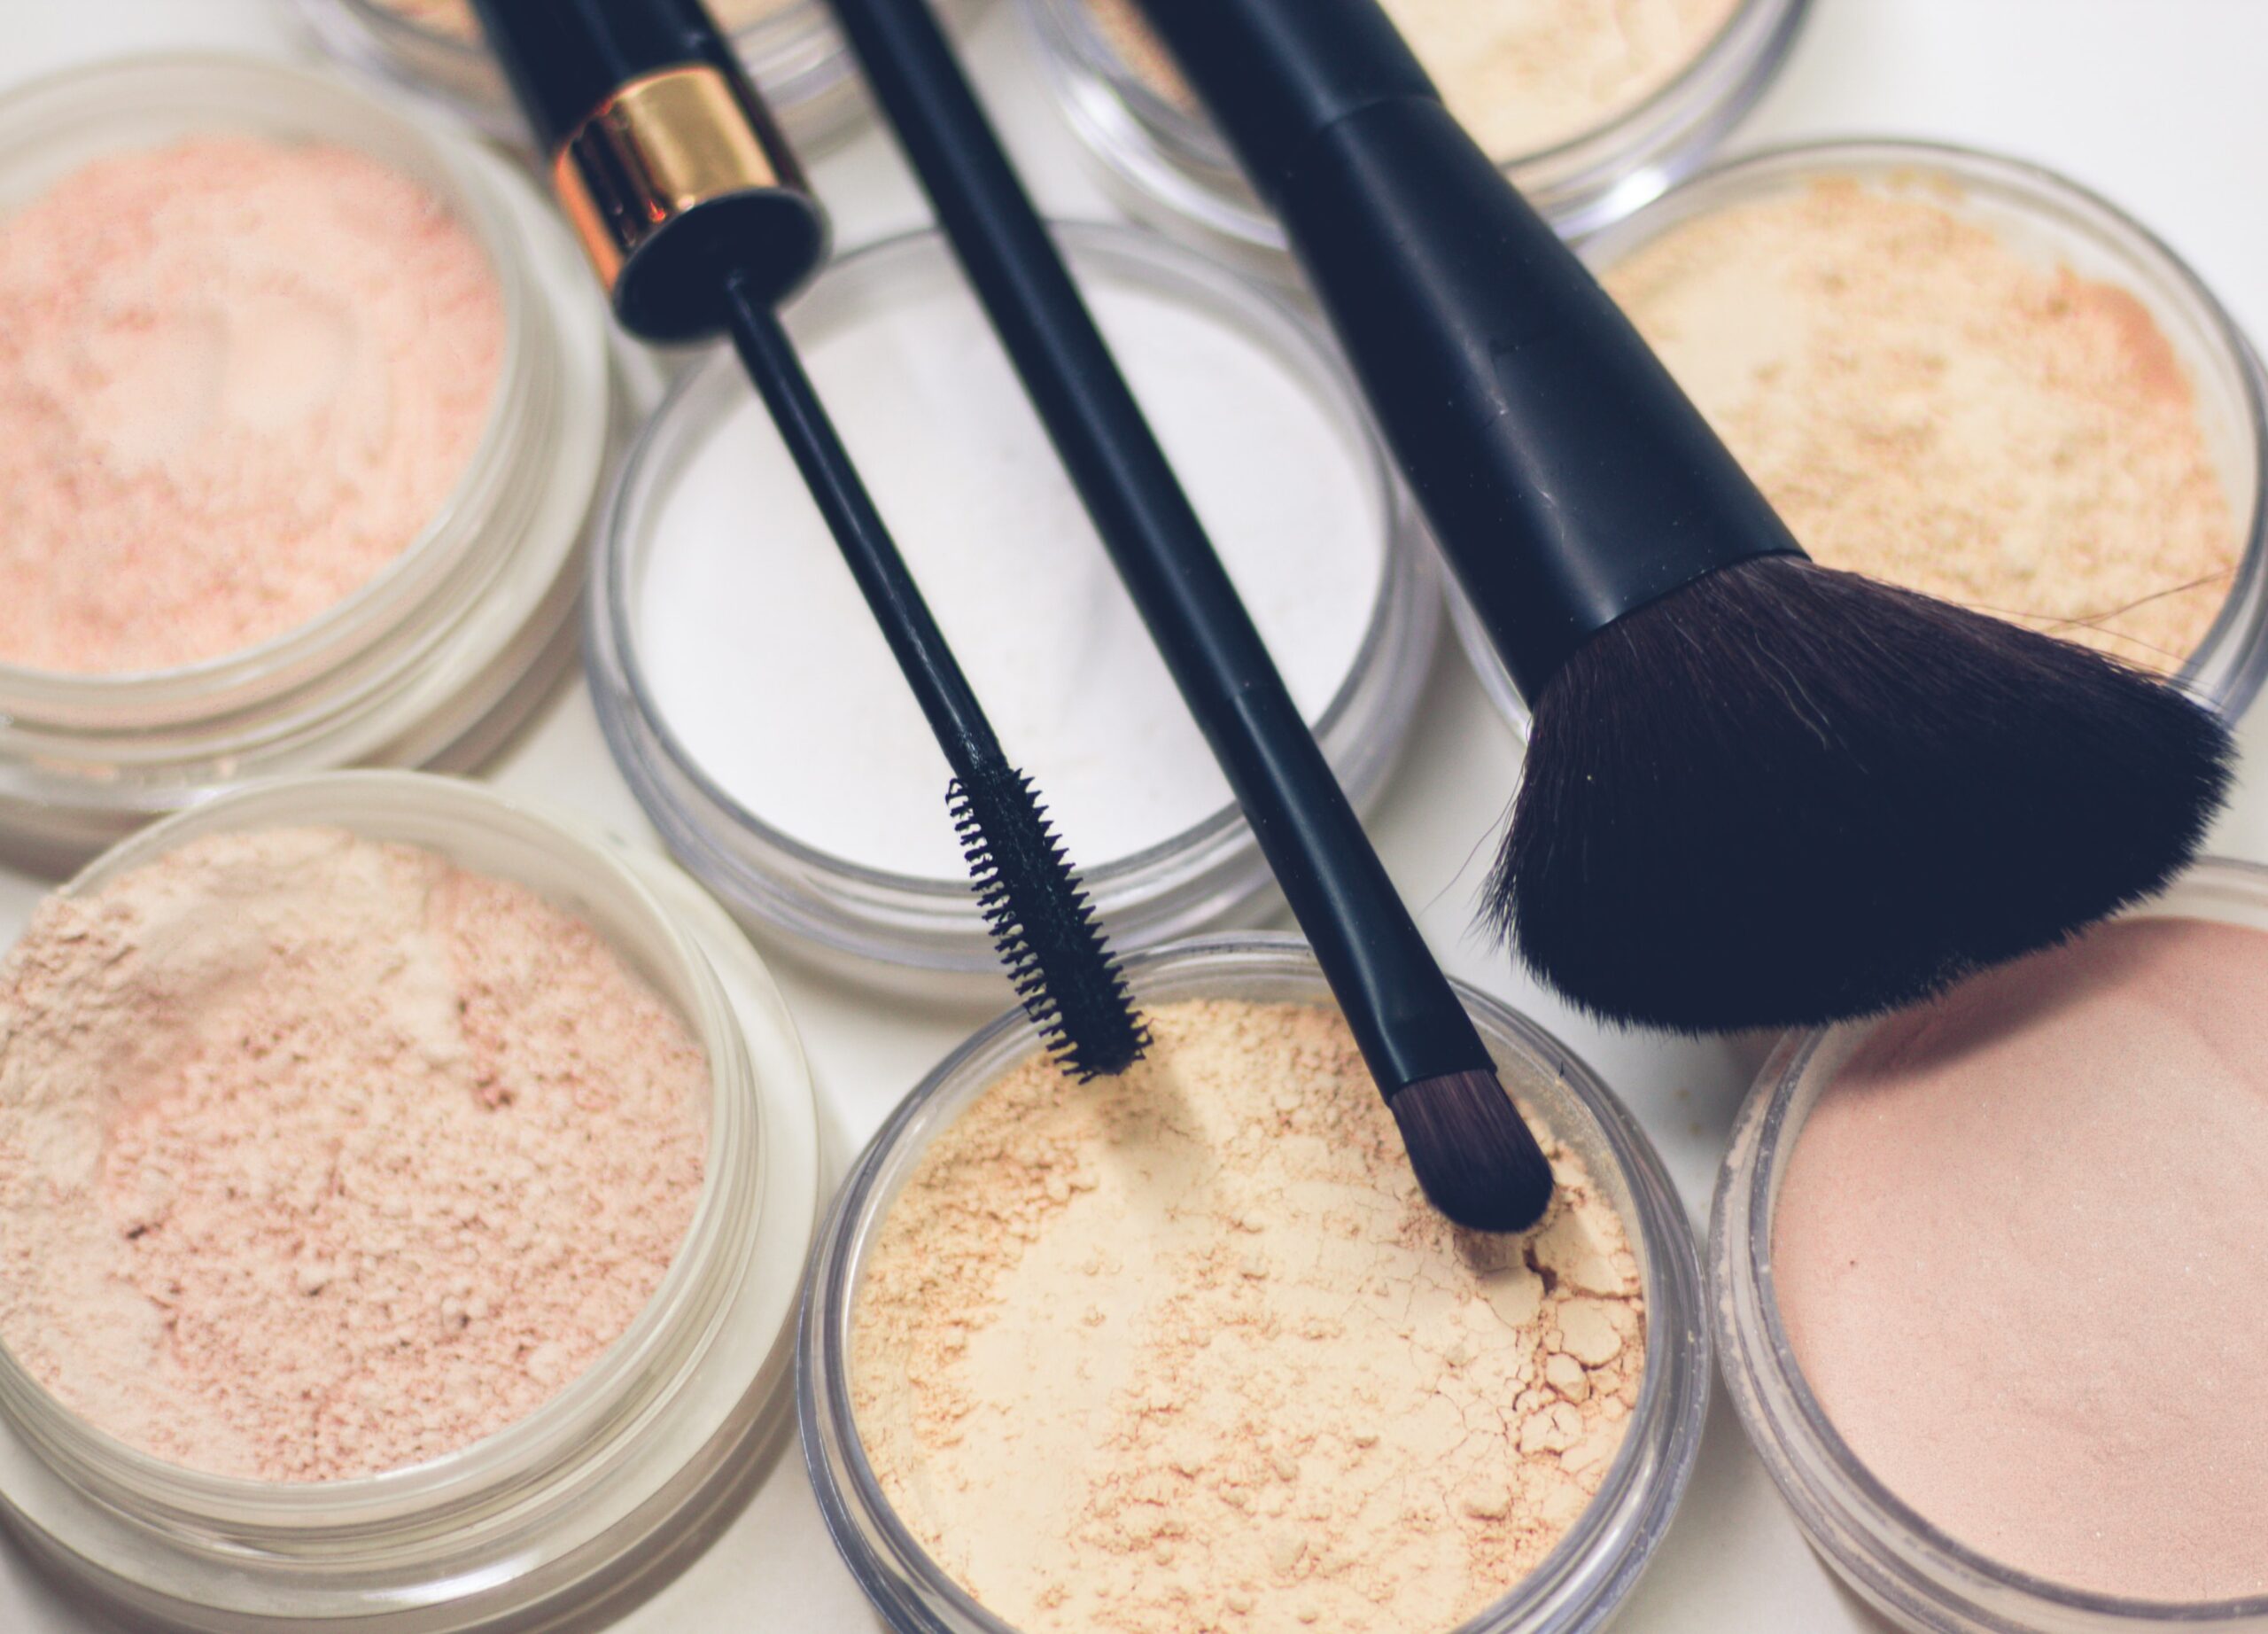 20 Best Natural Makeup Brands For Clean, Healthy Beauty